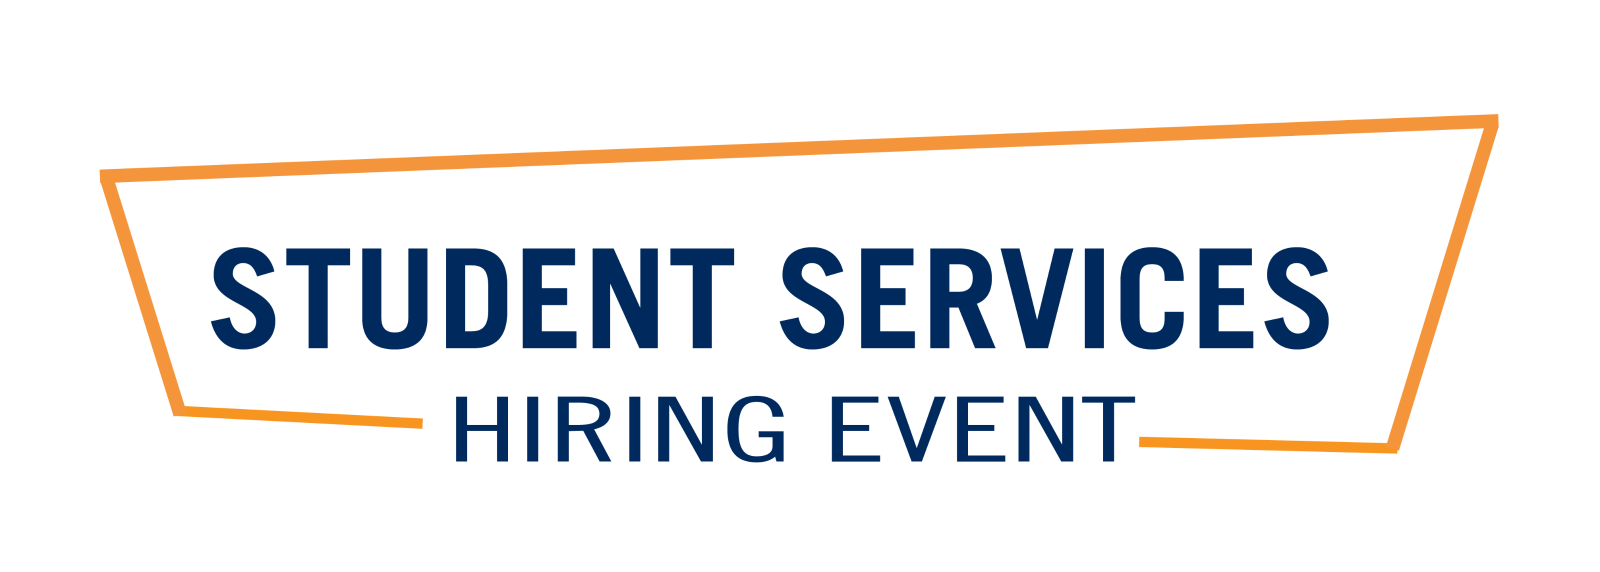 Student Services Hiring Event logo